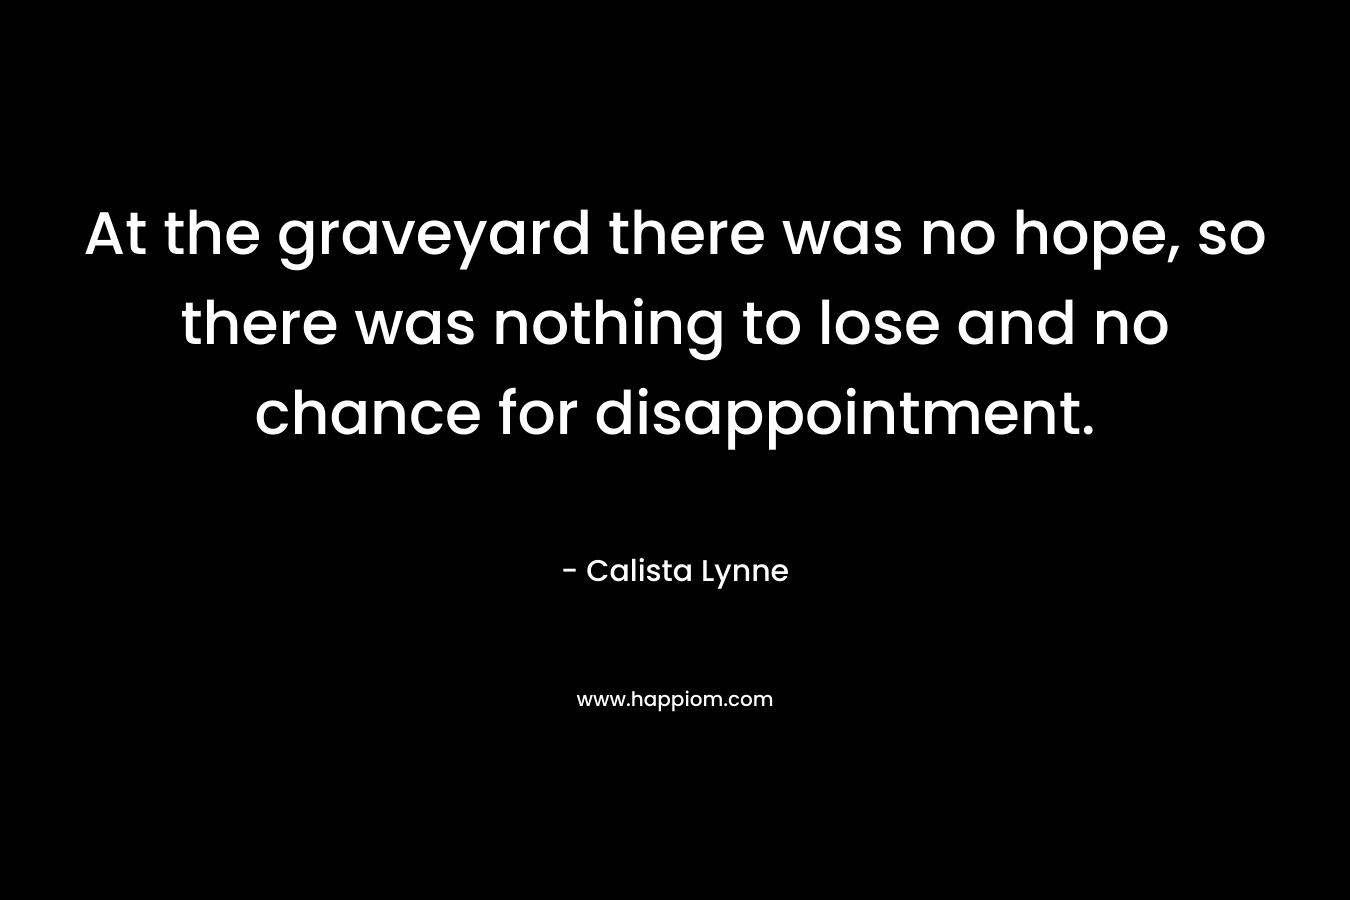 At the graveyard there was no hope, so there was nothing to lose and no chance for disappointment.